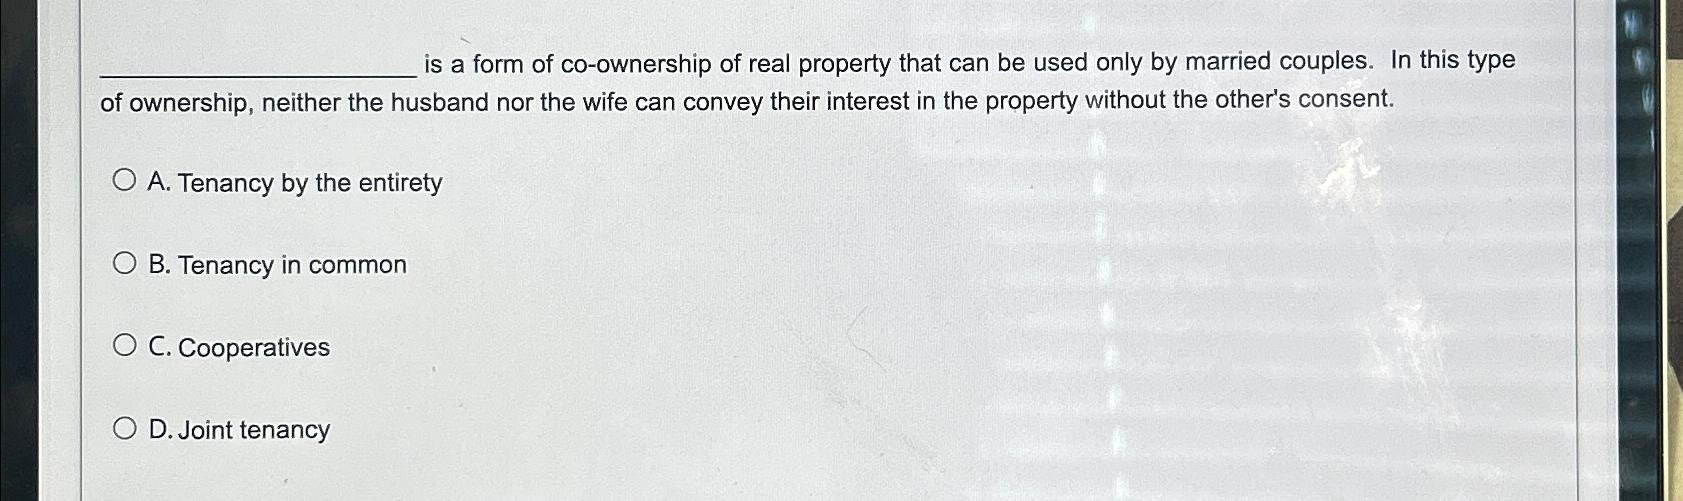 is a form of co-ownership of real property that can be used only by married couples. In this type of